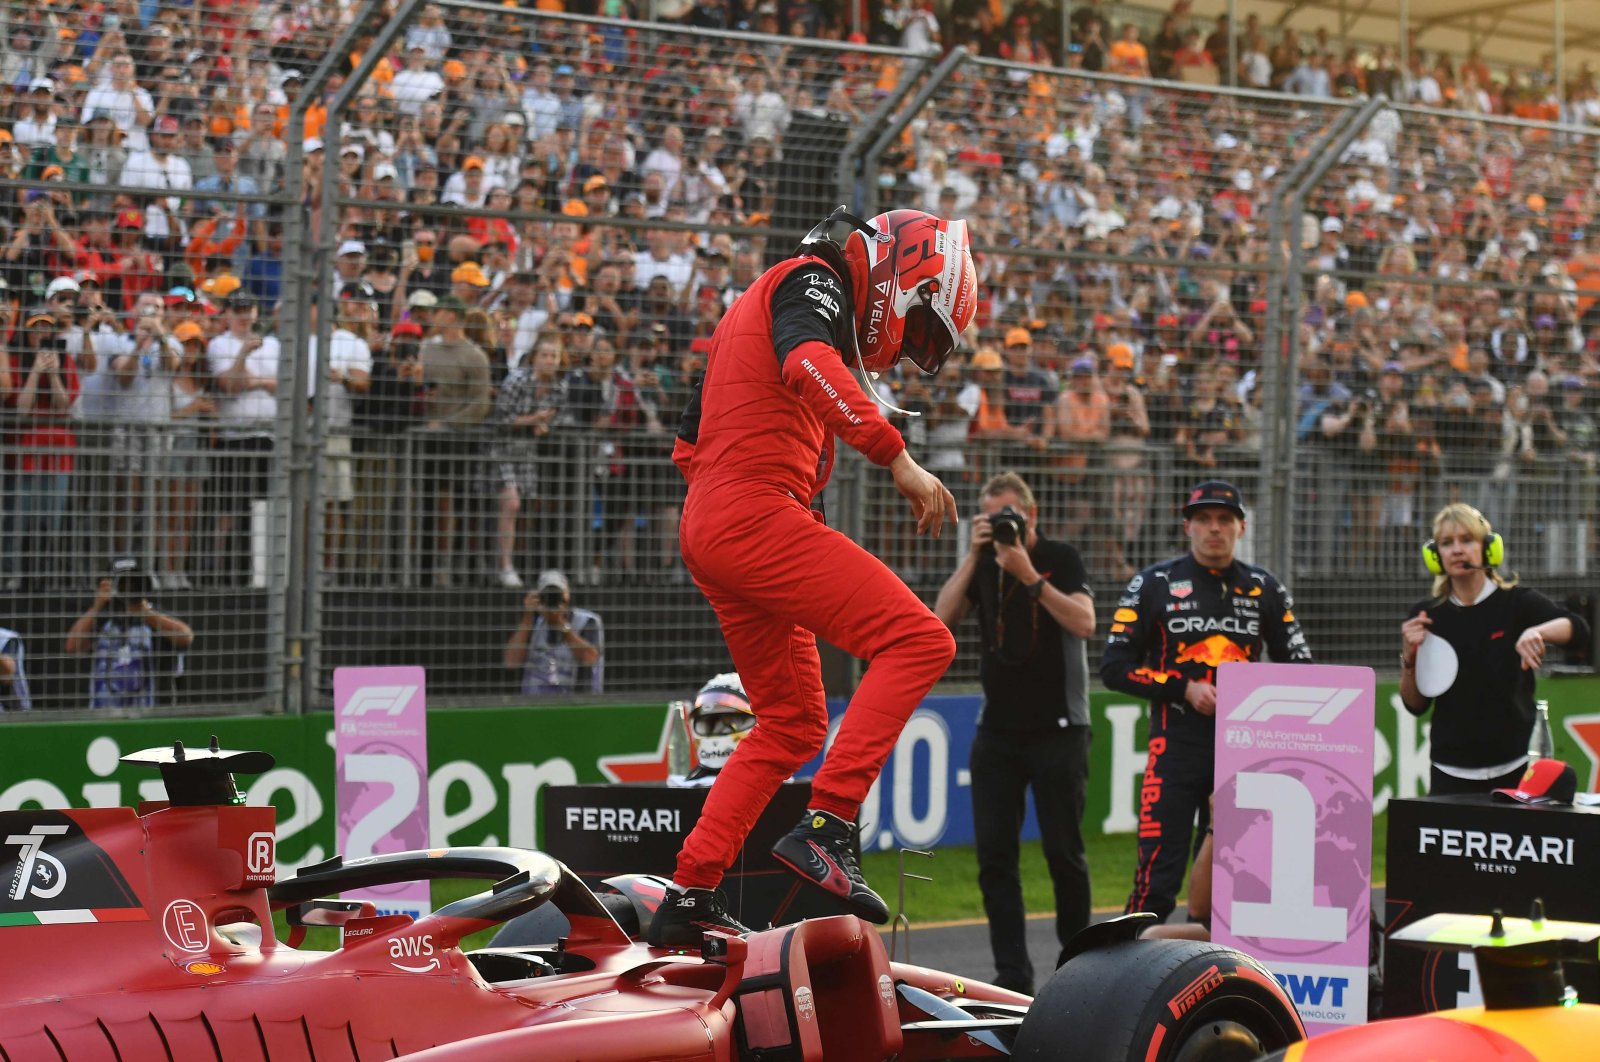 Ferrari&#039;s Monegasque driver Charles Leclerc comes out of his car to celebrate pole position in the qualifying session at the Albert Park Circuit in Melbourne, ahead of the 2022 Formula One Australian Grand Prix, April 9, 2022. (AFP Photo)